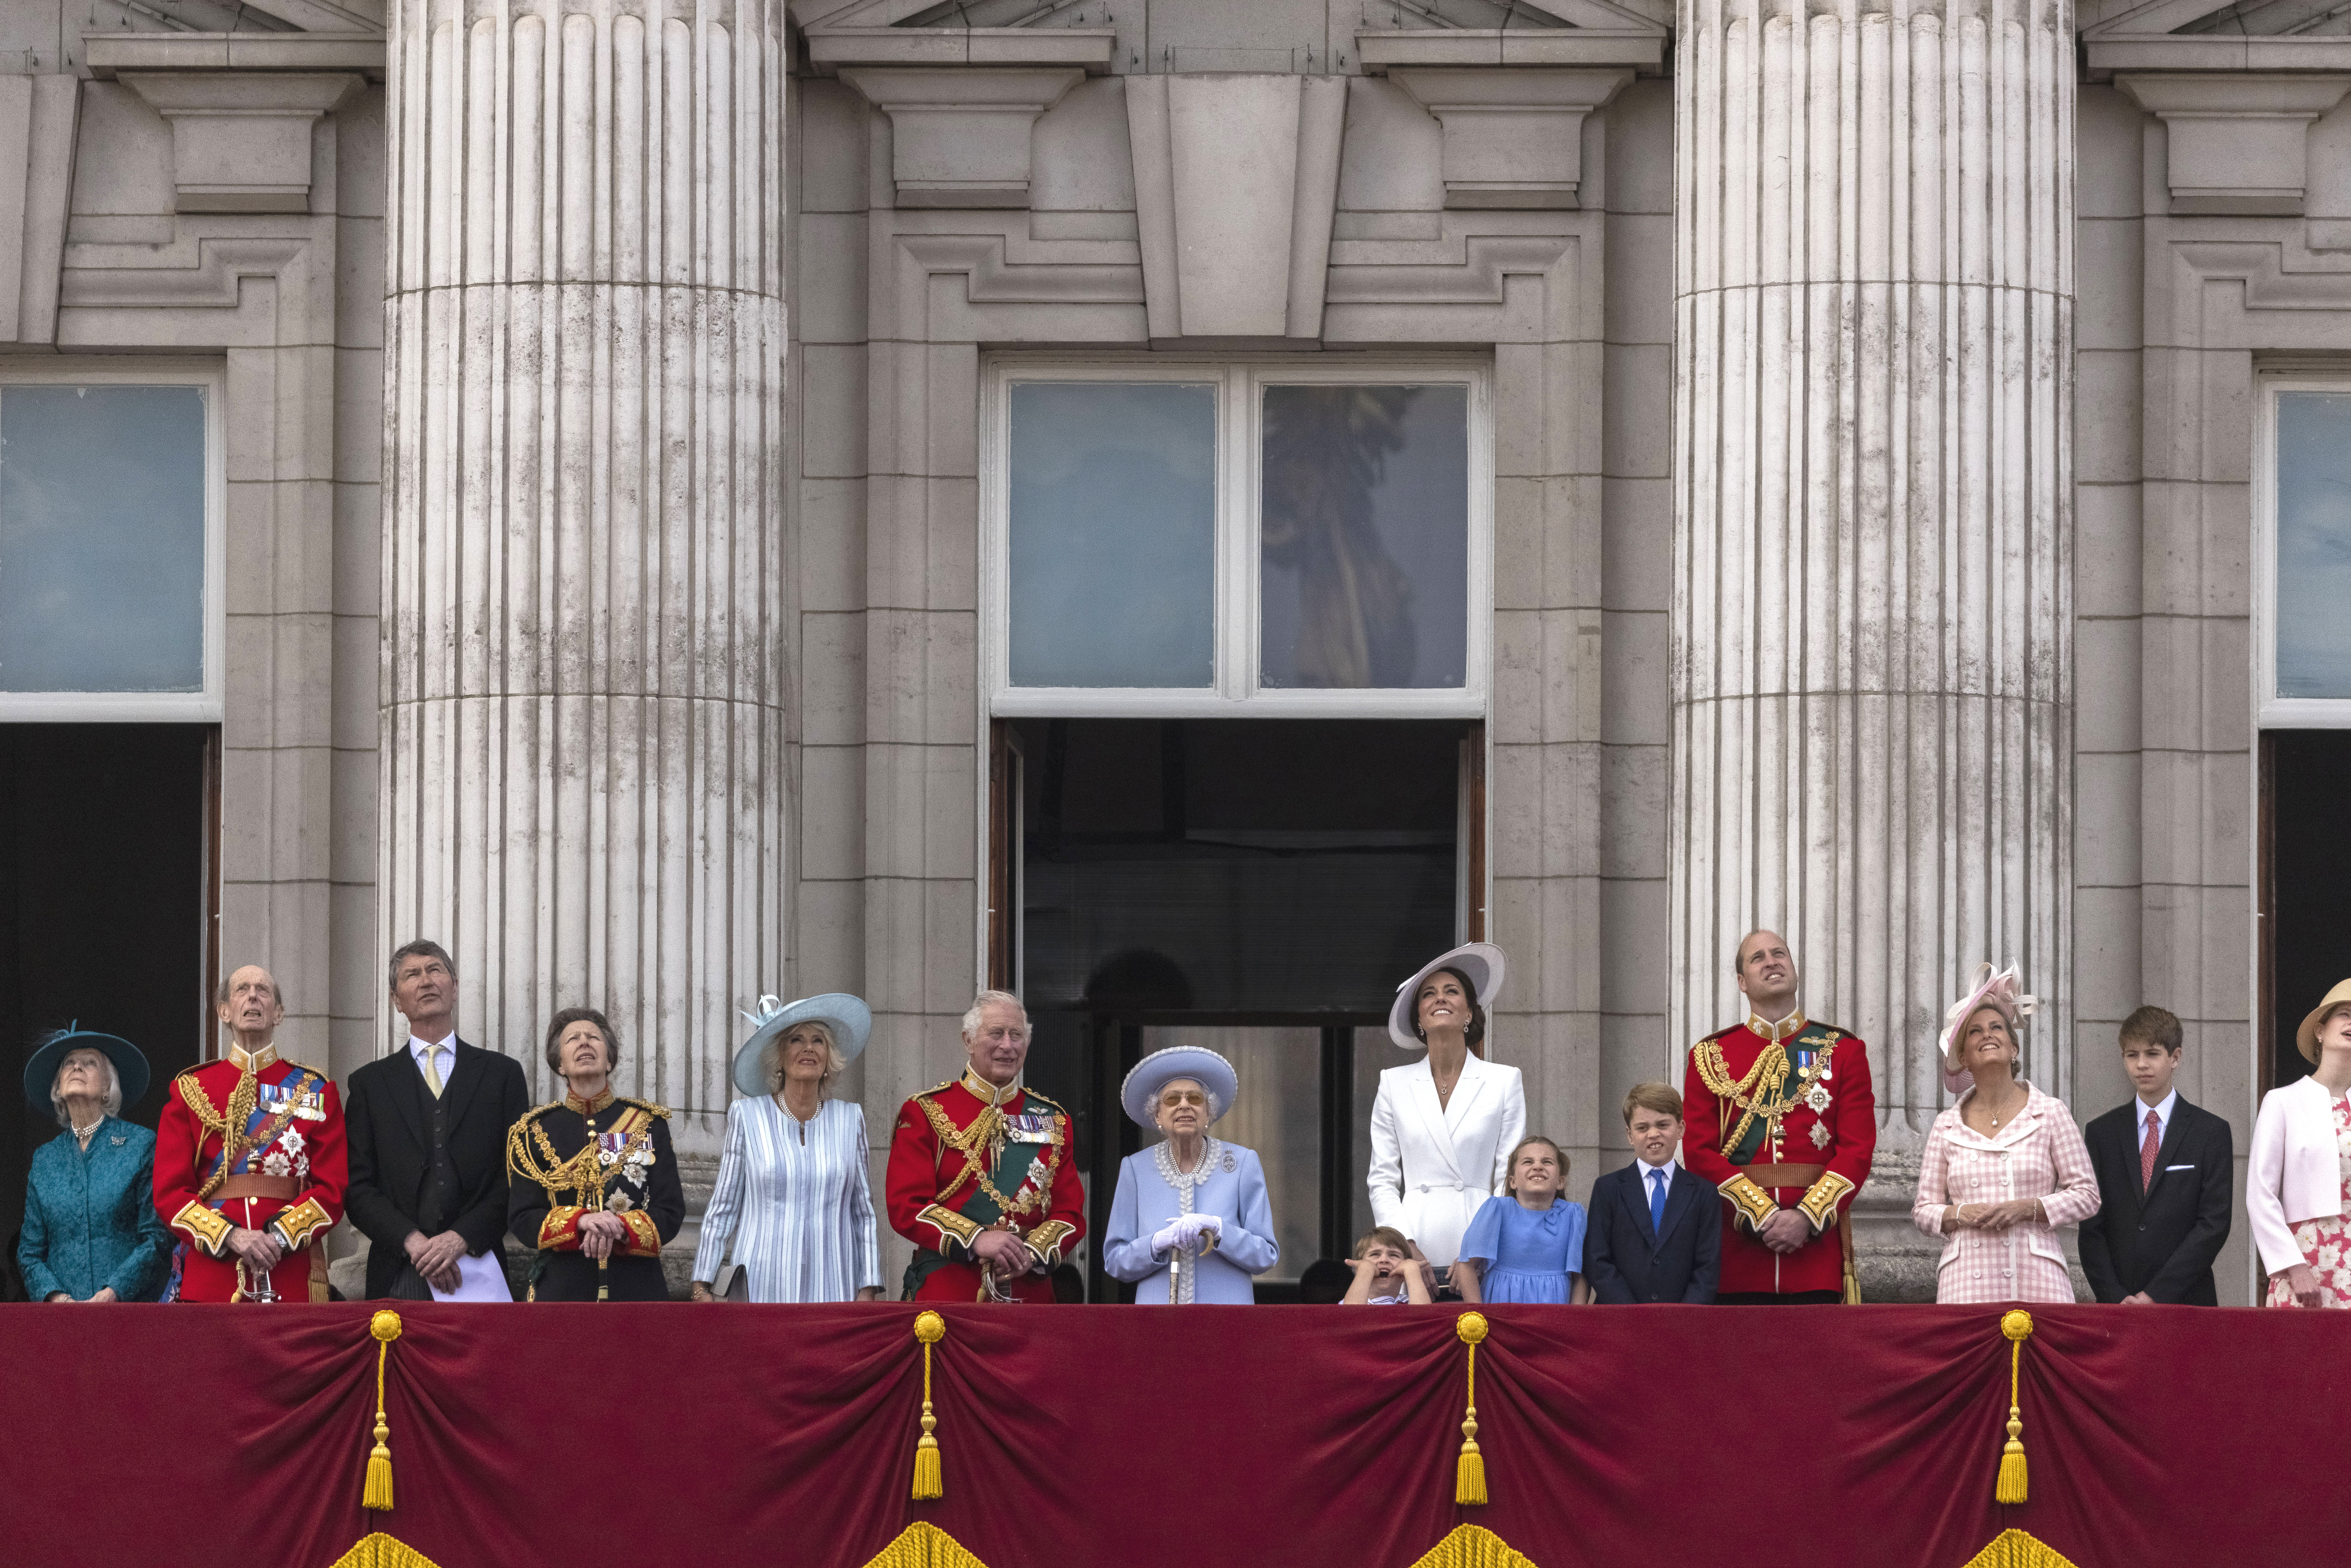 Royals on the balcony.